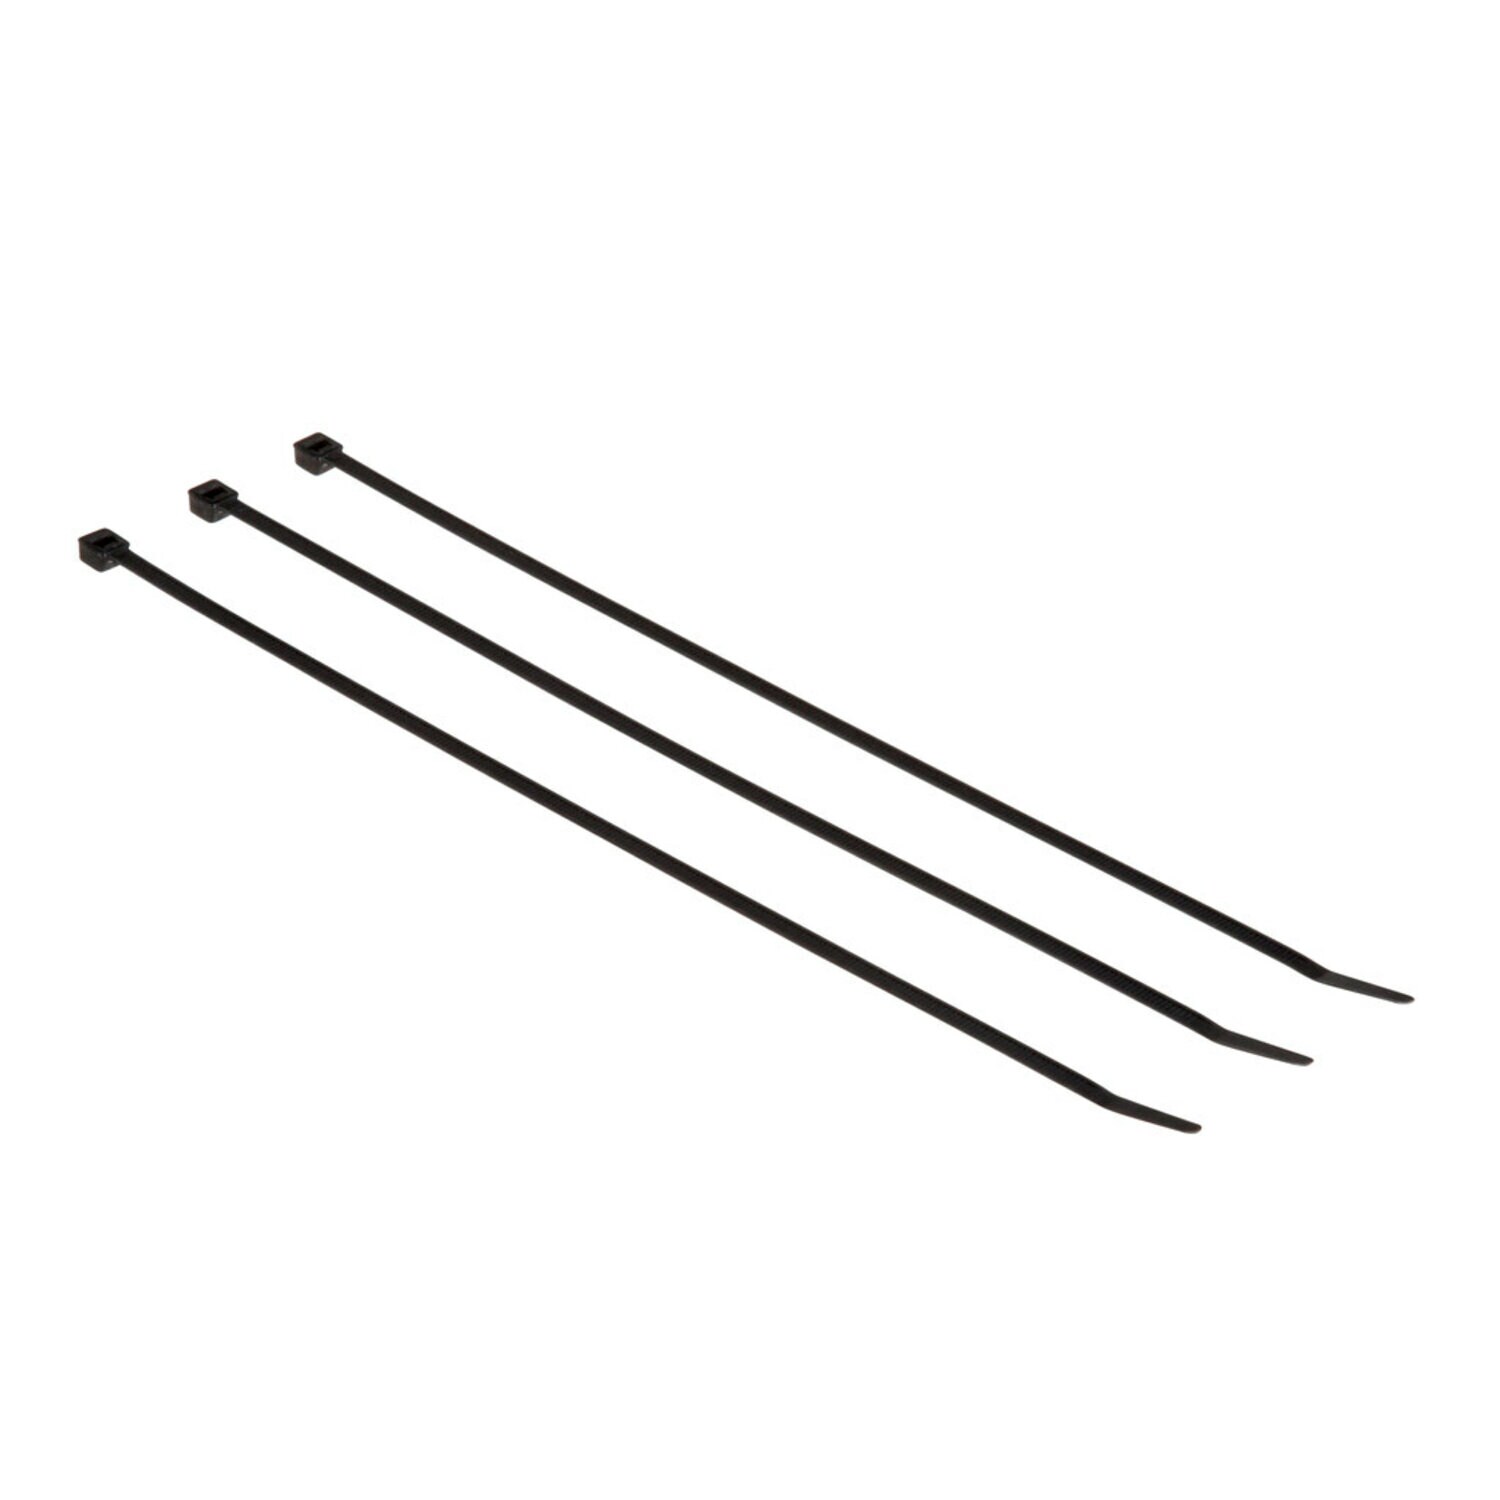 7000058850 - 3M Cable Tie CT11BK50-C, curved tip allows for faster threading and
installation, 10 Packs/Case